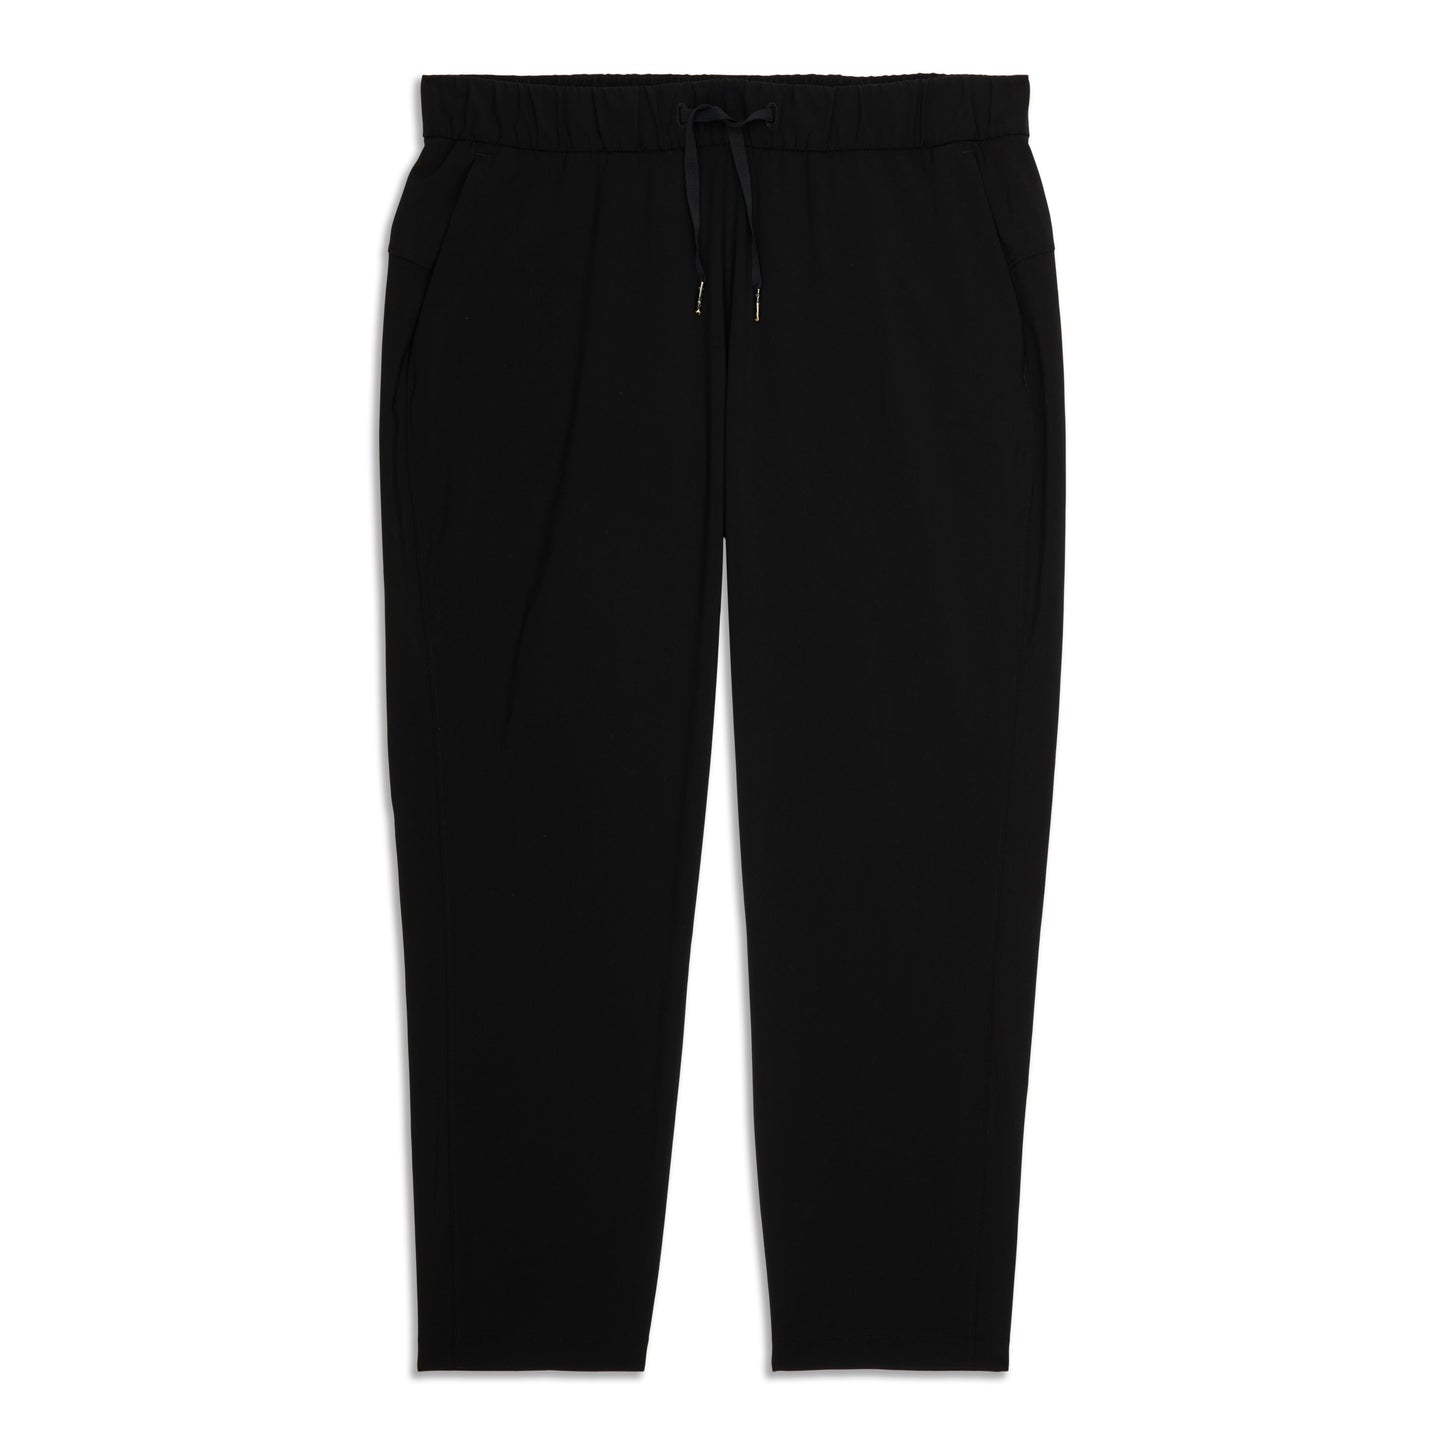 On The Fly Pant - Resale